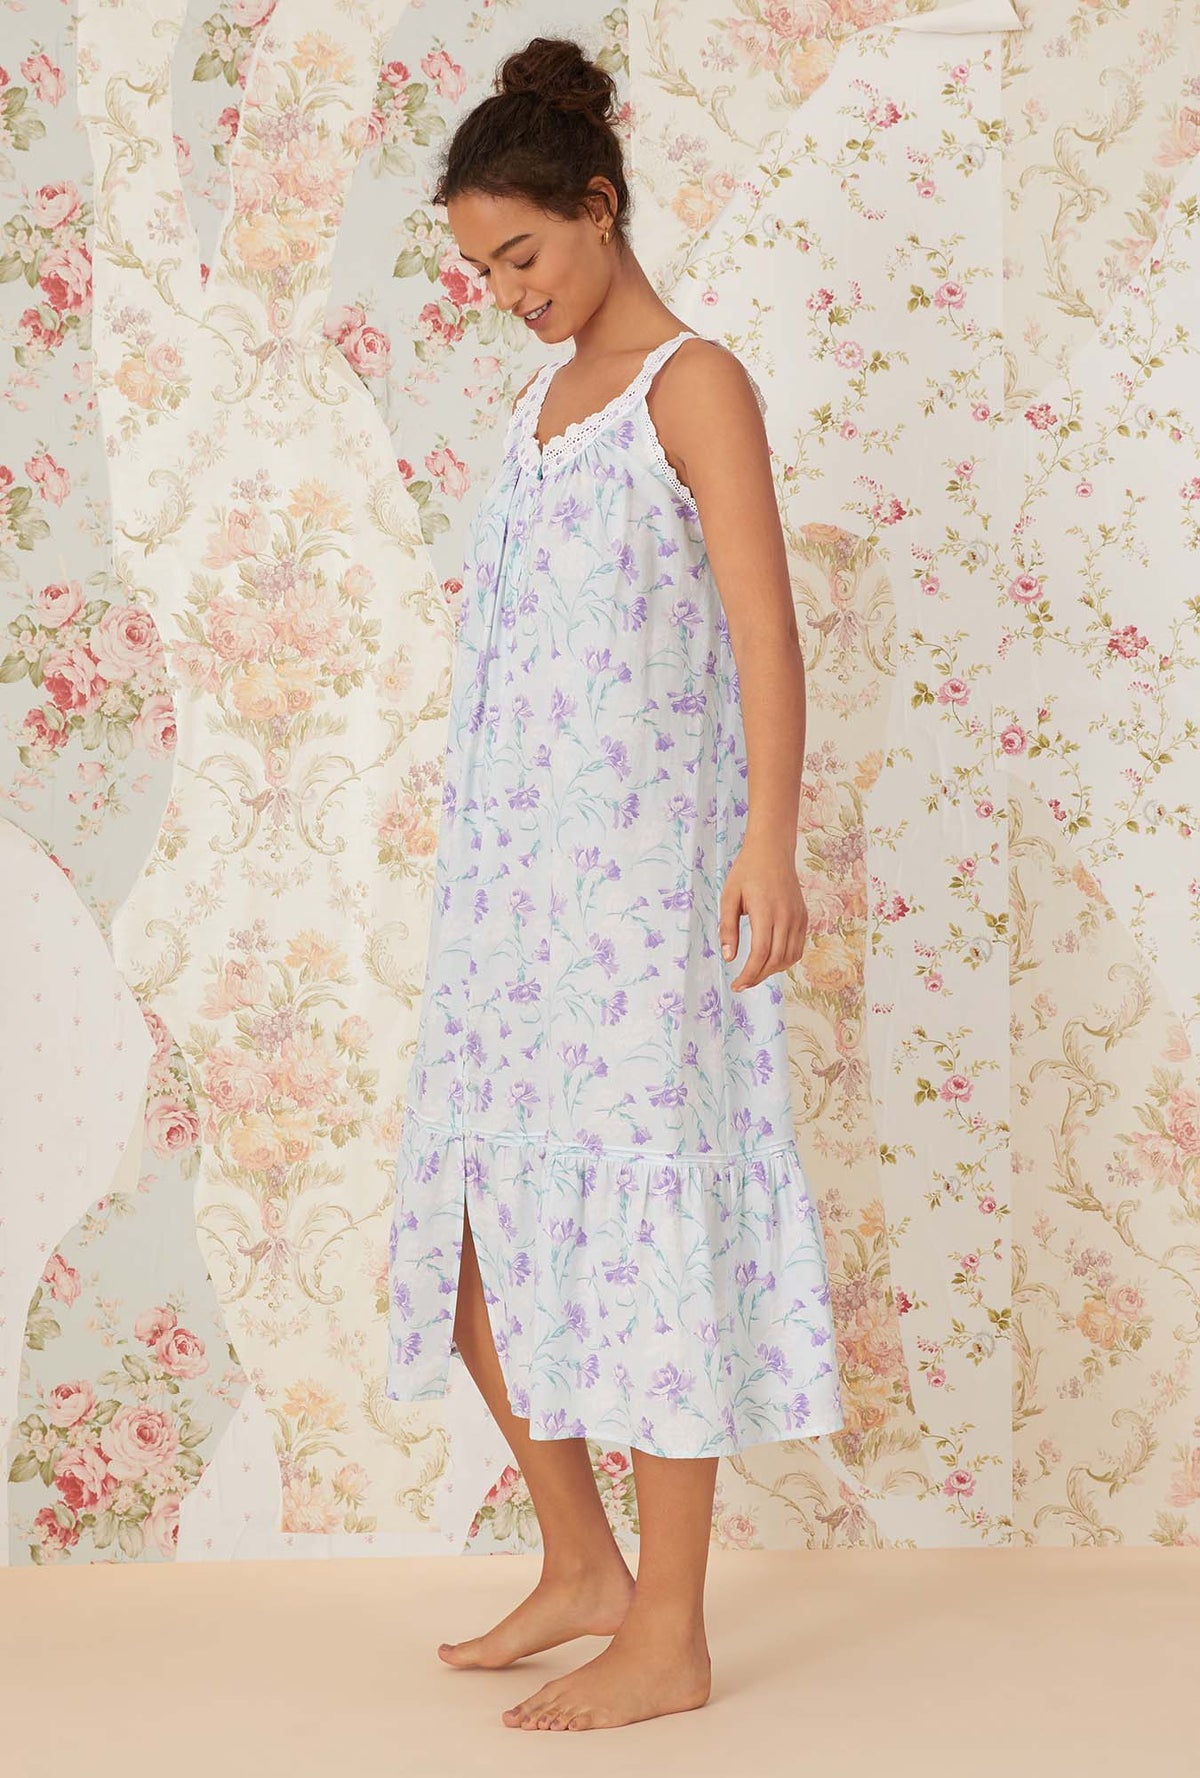 A lady wearing white sleeveless shelby Nightgown with lavender carnations print